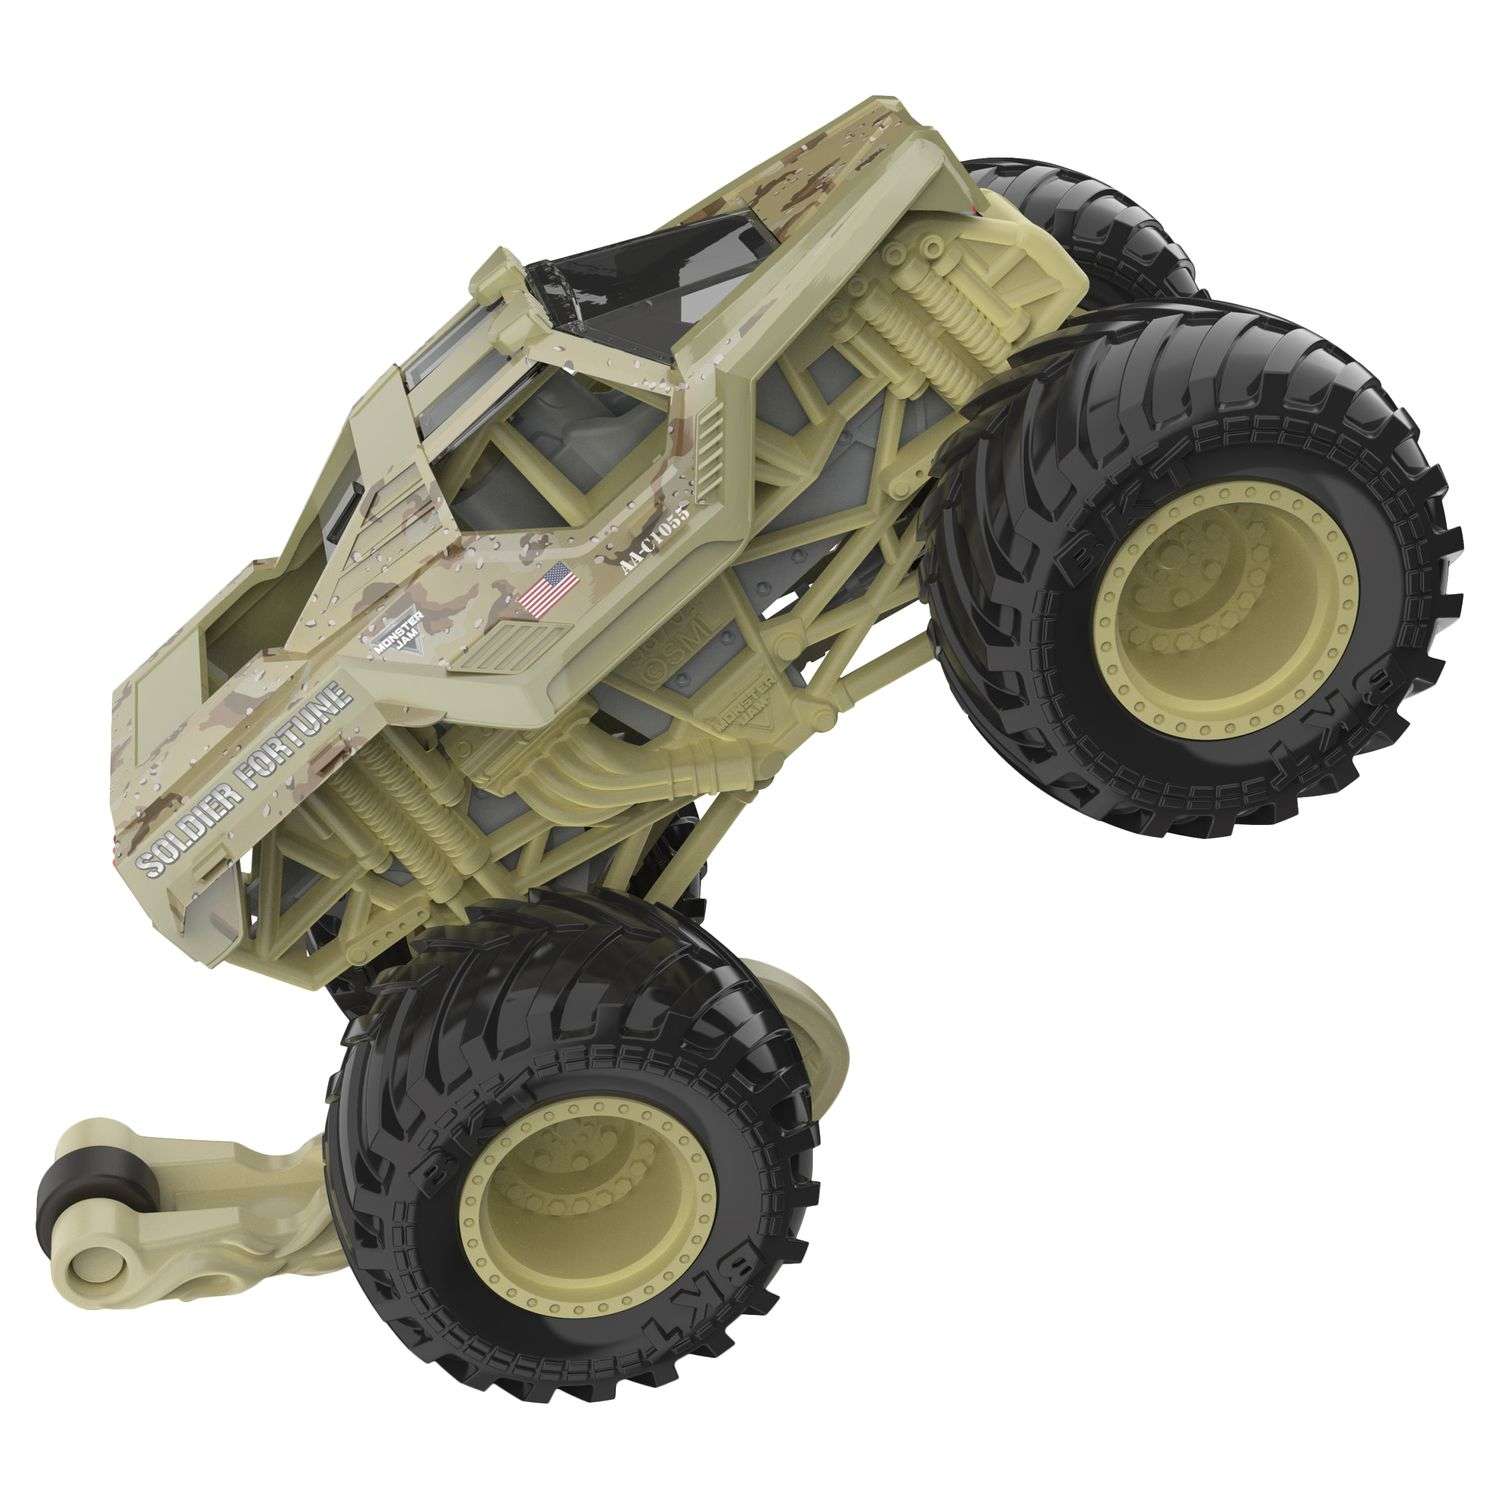 Машинка Monster Jam 1:64 Soldier of Fortune 6060868 6060868 - фото 6